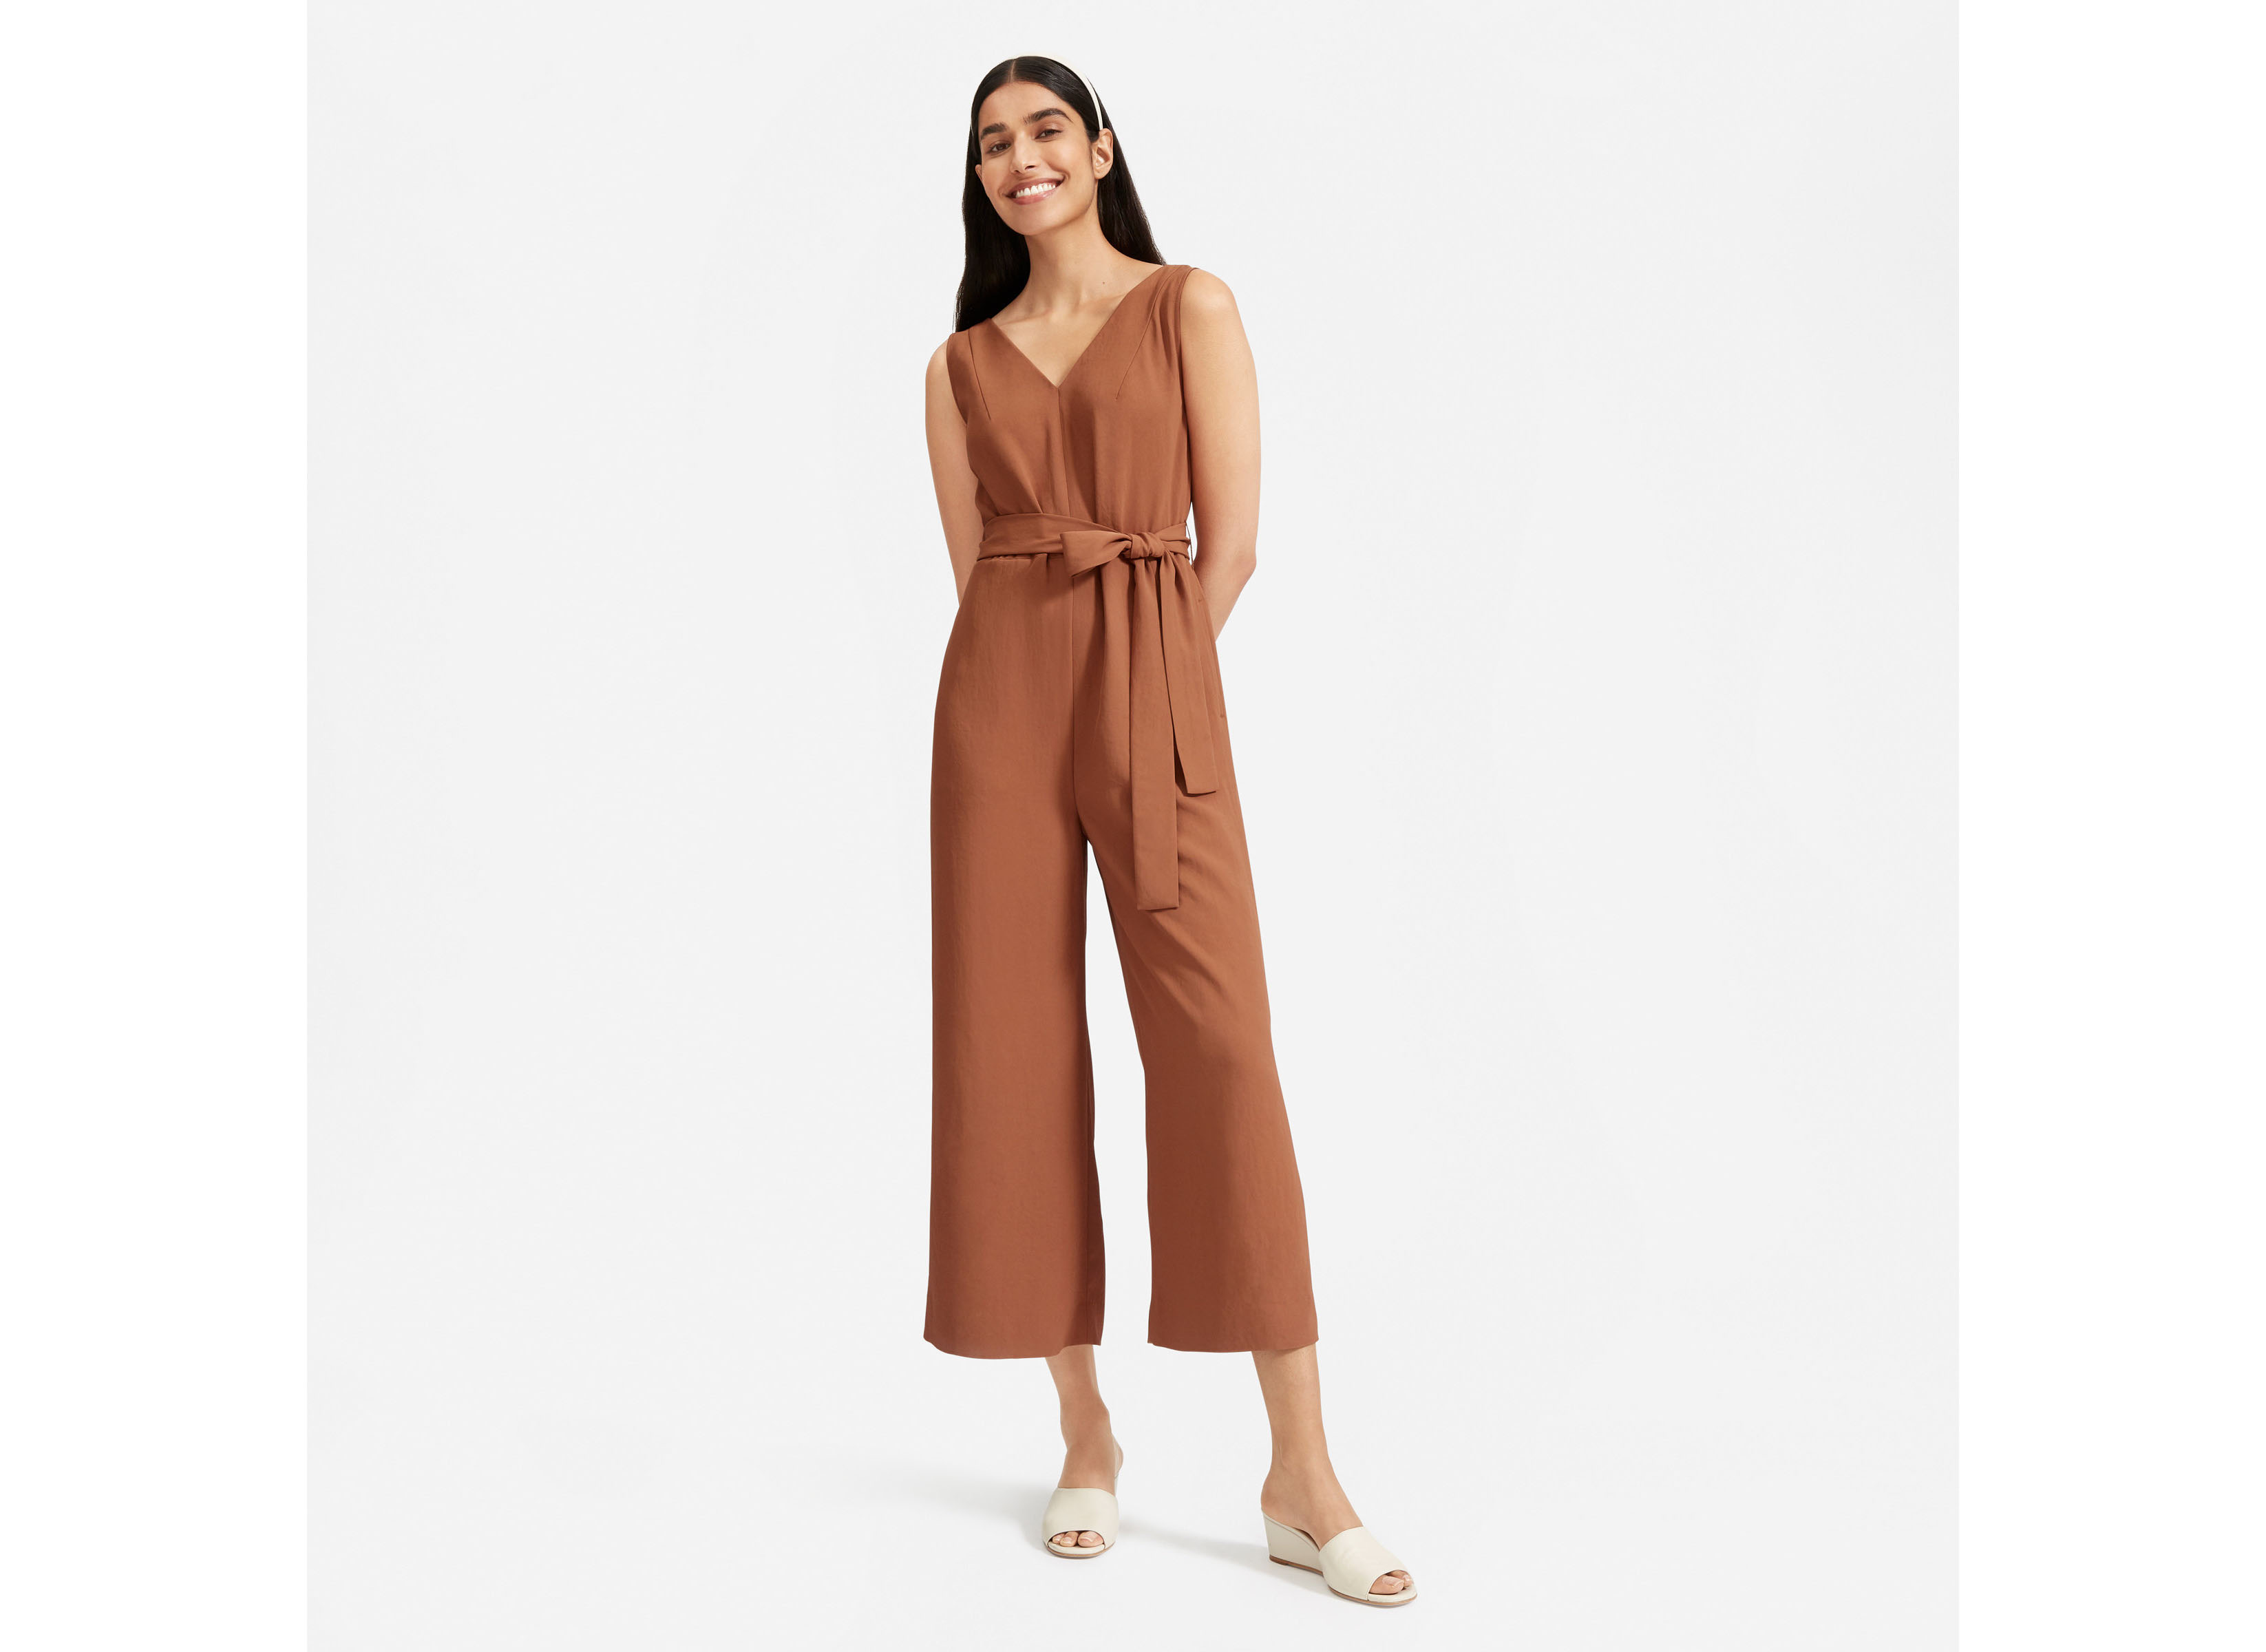 The Japanese GoWeave Essential Jumpsuit from Everlane